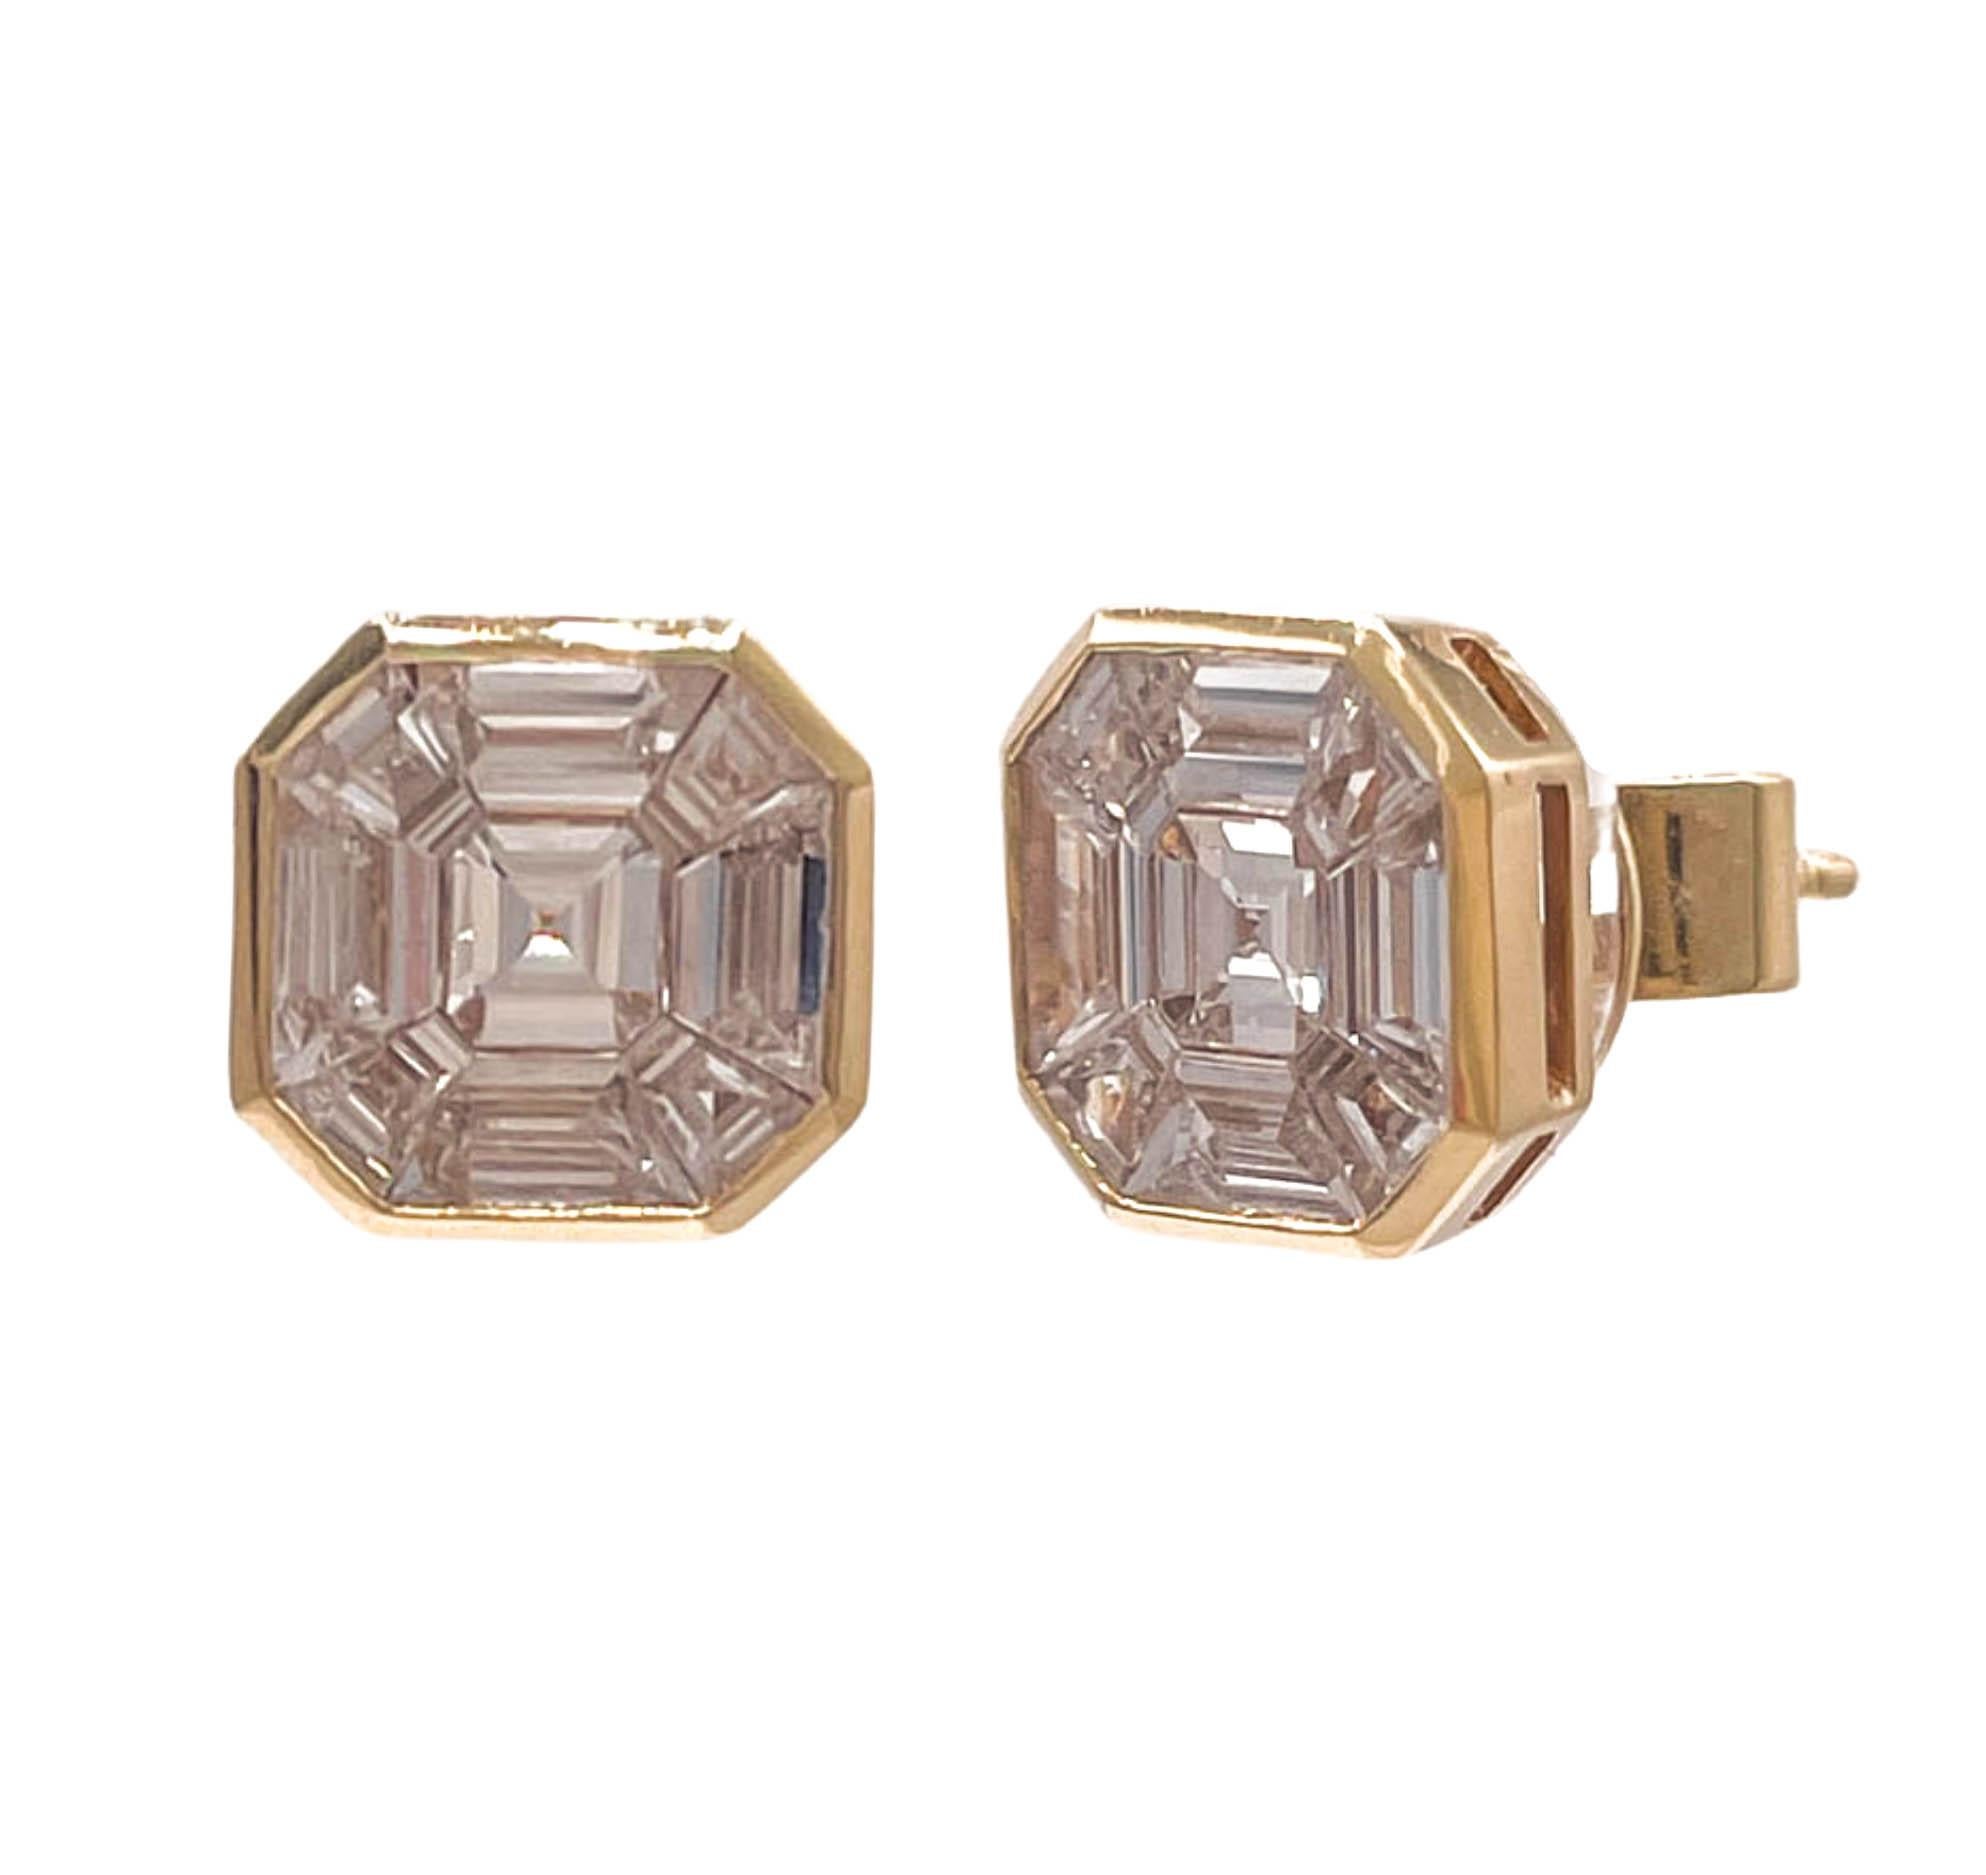 Jay Feder 18k Yellow Gold Invisible set Asscher Diamond Stud Earrings

There are 18 step cut diamonds; total carat weight is 1.34ctw. 

The earrings measurements are 8.77x8.59mm. Total weight is 2.9 grams. 

Please view our photos and videos for